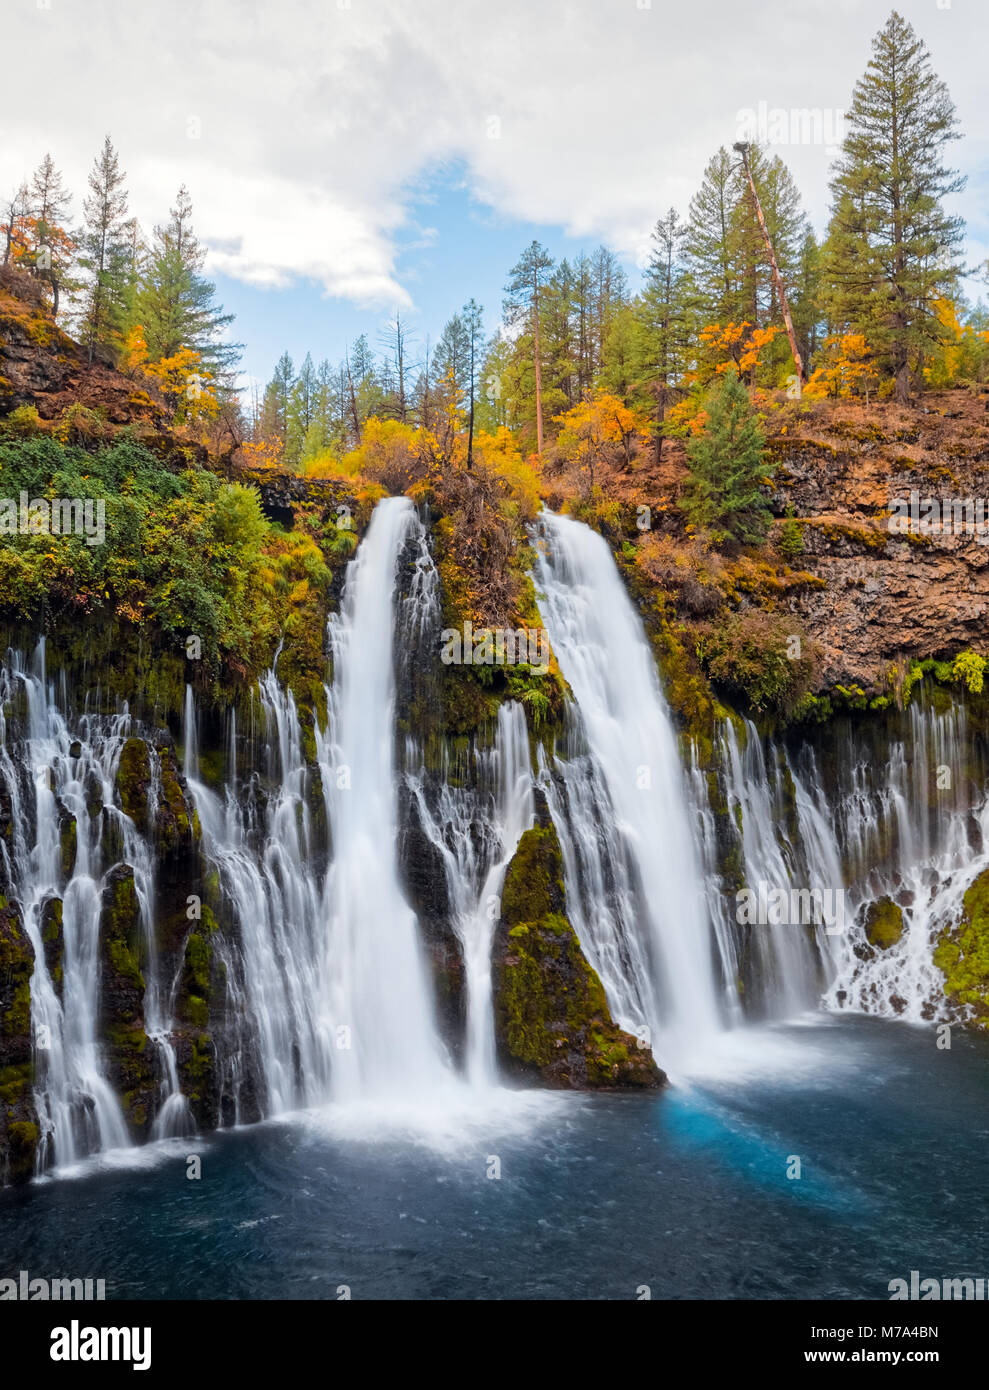 Beautiful waterfall in autumn, with green and yellow trees at McArthur-Burney Falls Memorial State Park, in Shasta County, Northern California. Stock Photo